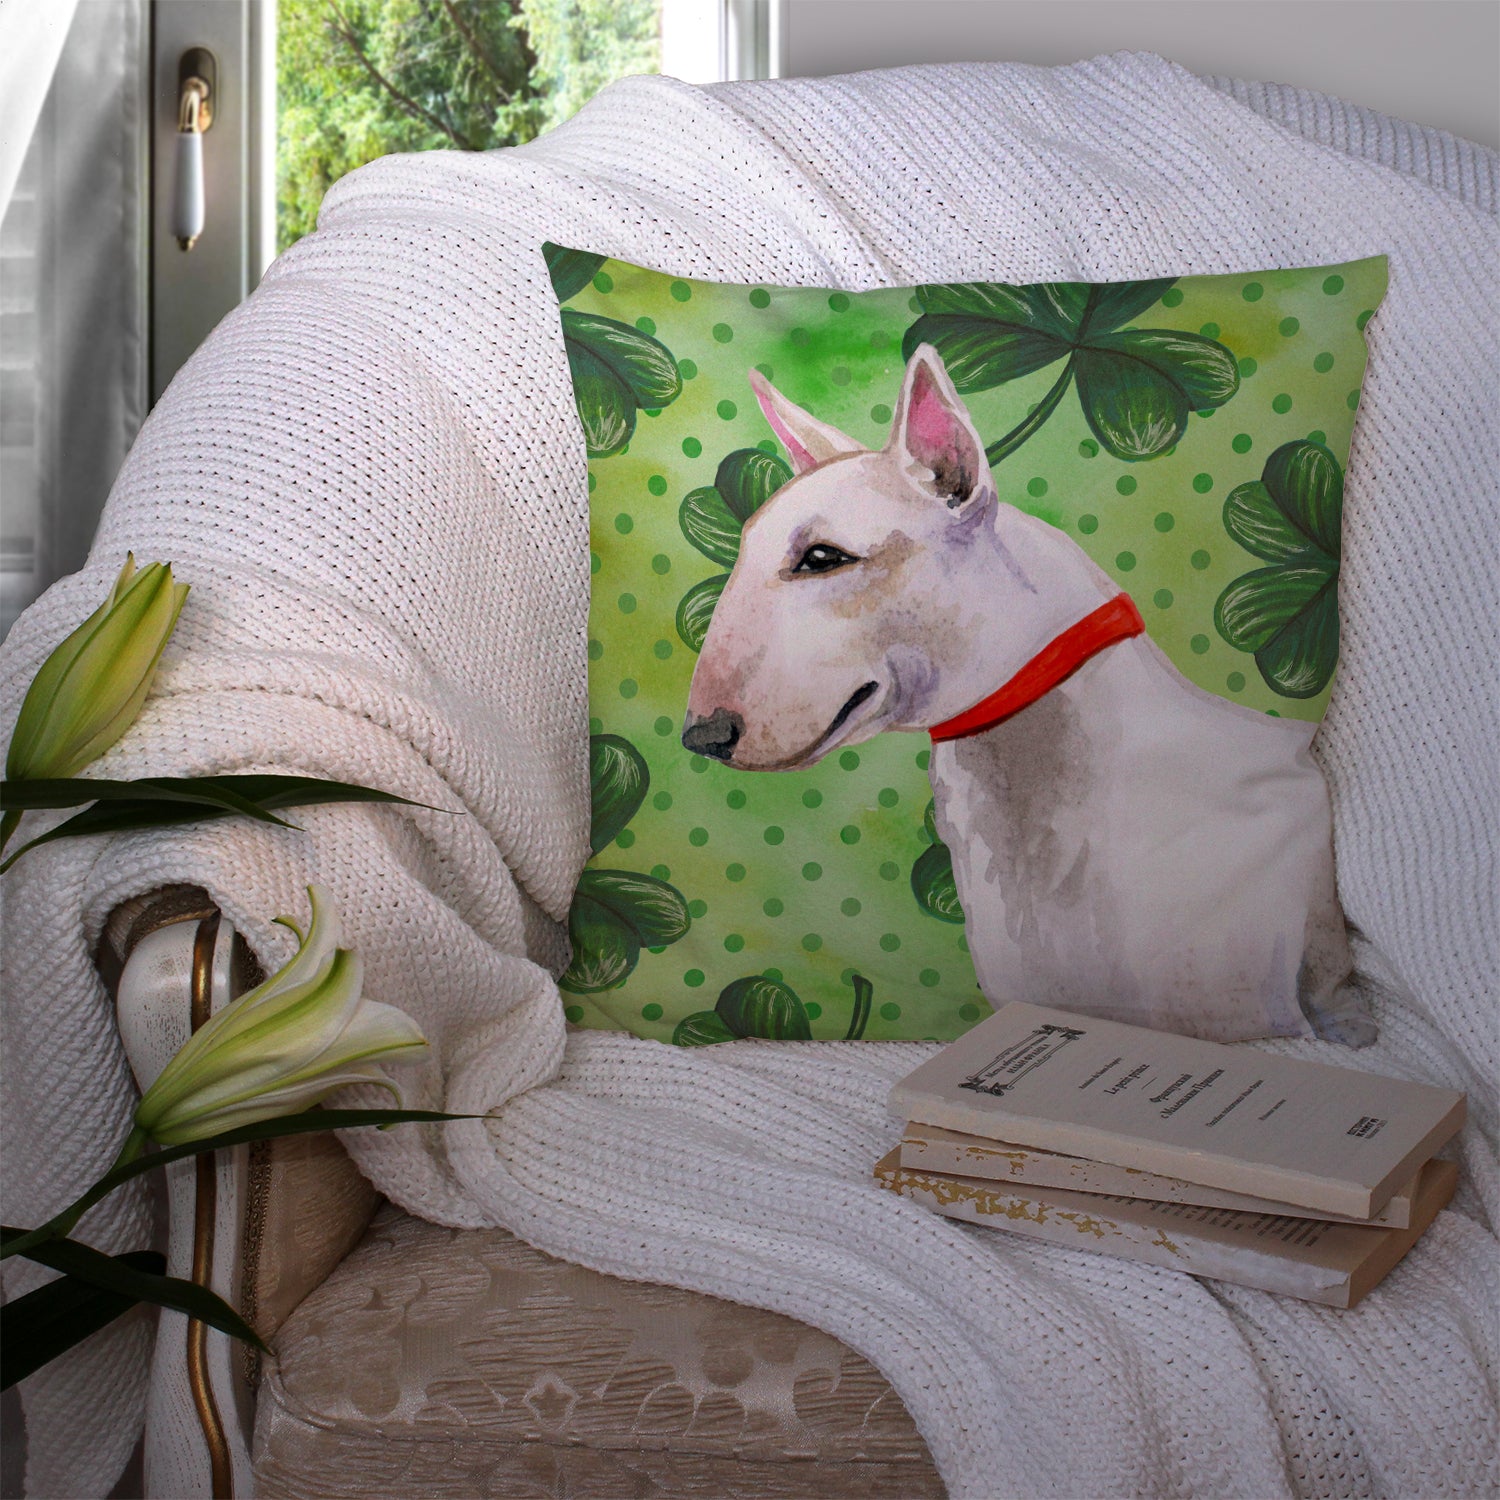 Bull Terrier St Patrick's Fabric Decorative Pillow BB9867PW1414 - the-store.com